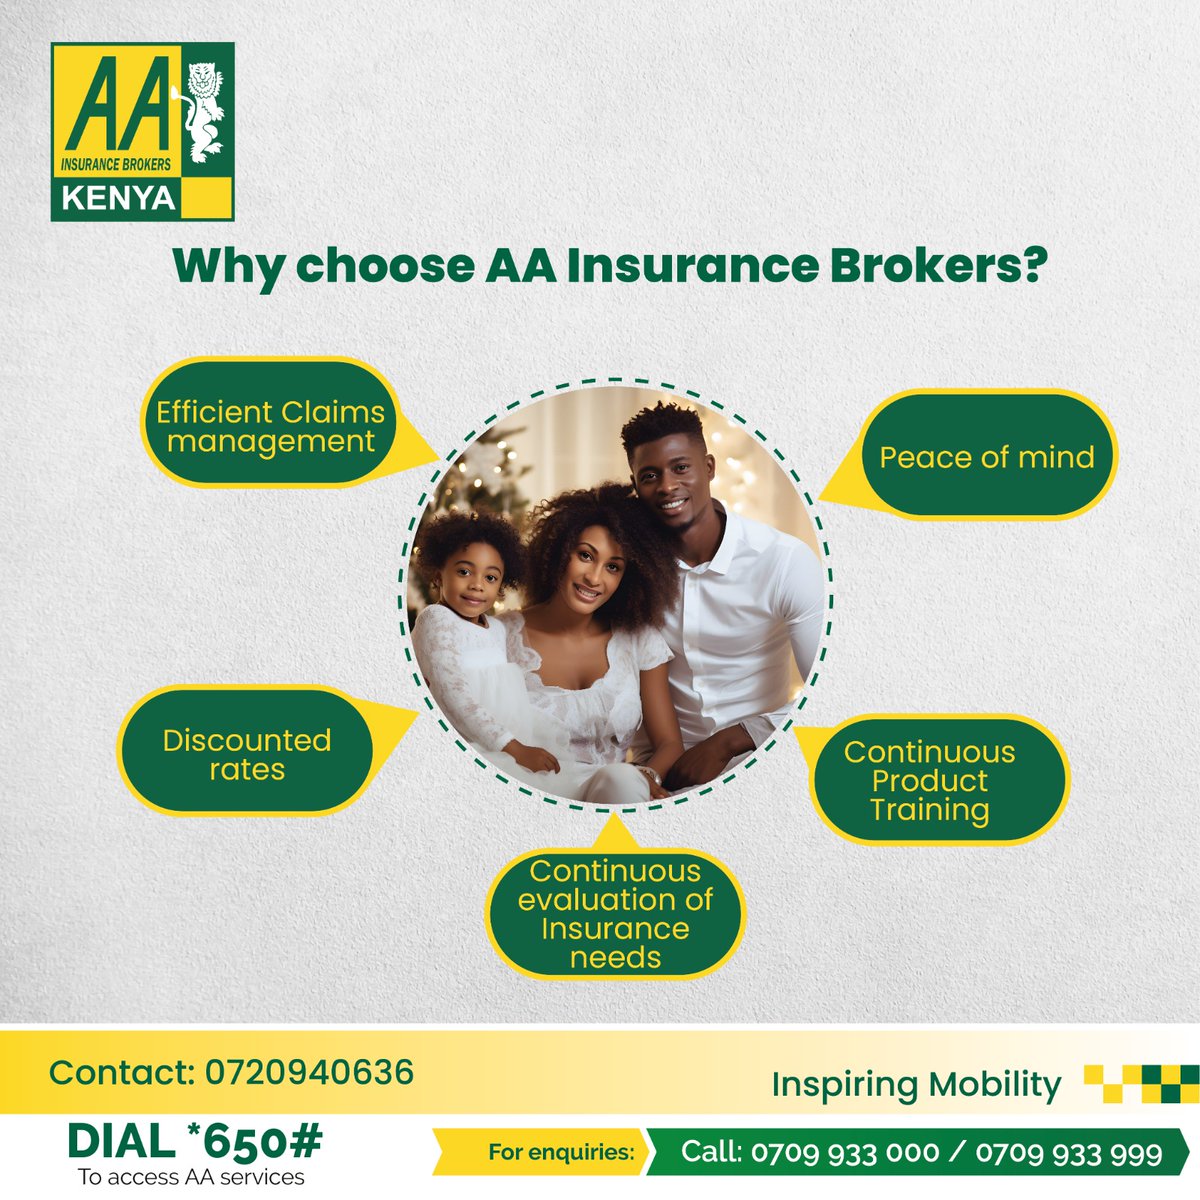 Find out why AA Insurance Brokers is different! Enjoy efficient claims management, discounted rates, continuous evaluation of your insurance needs, peace of mind, and ongoing product training. Trust us for all your insurance needs Call us on 0720940636
#AAIBCares #Insurance